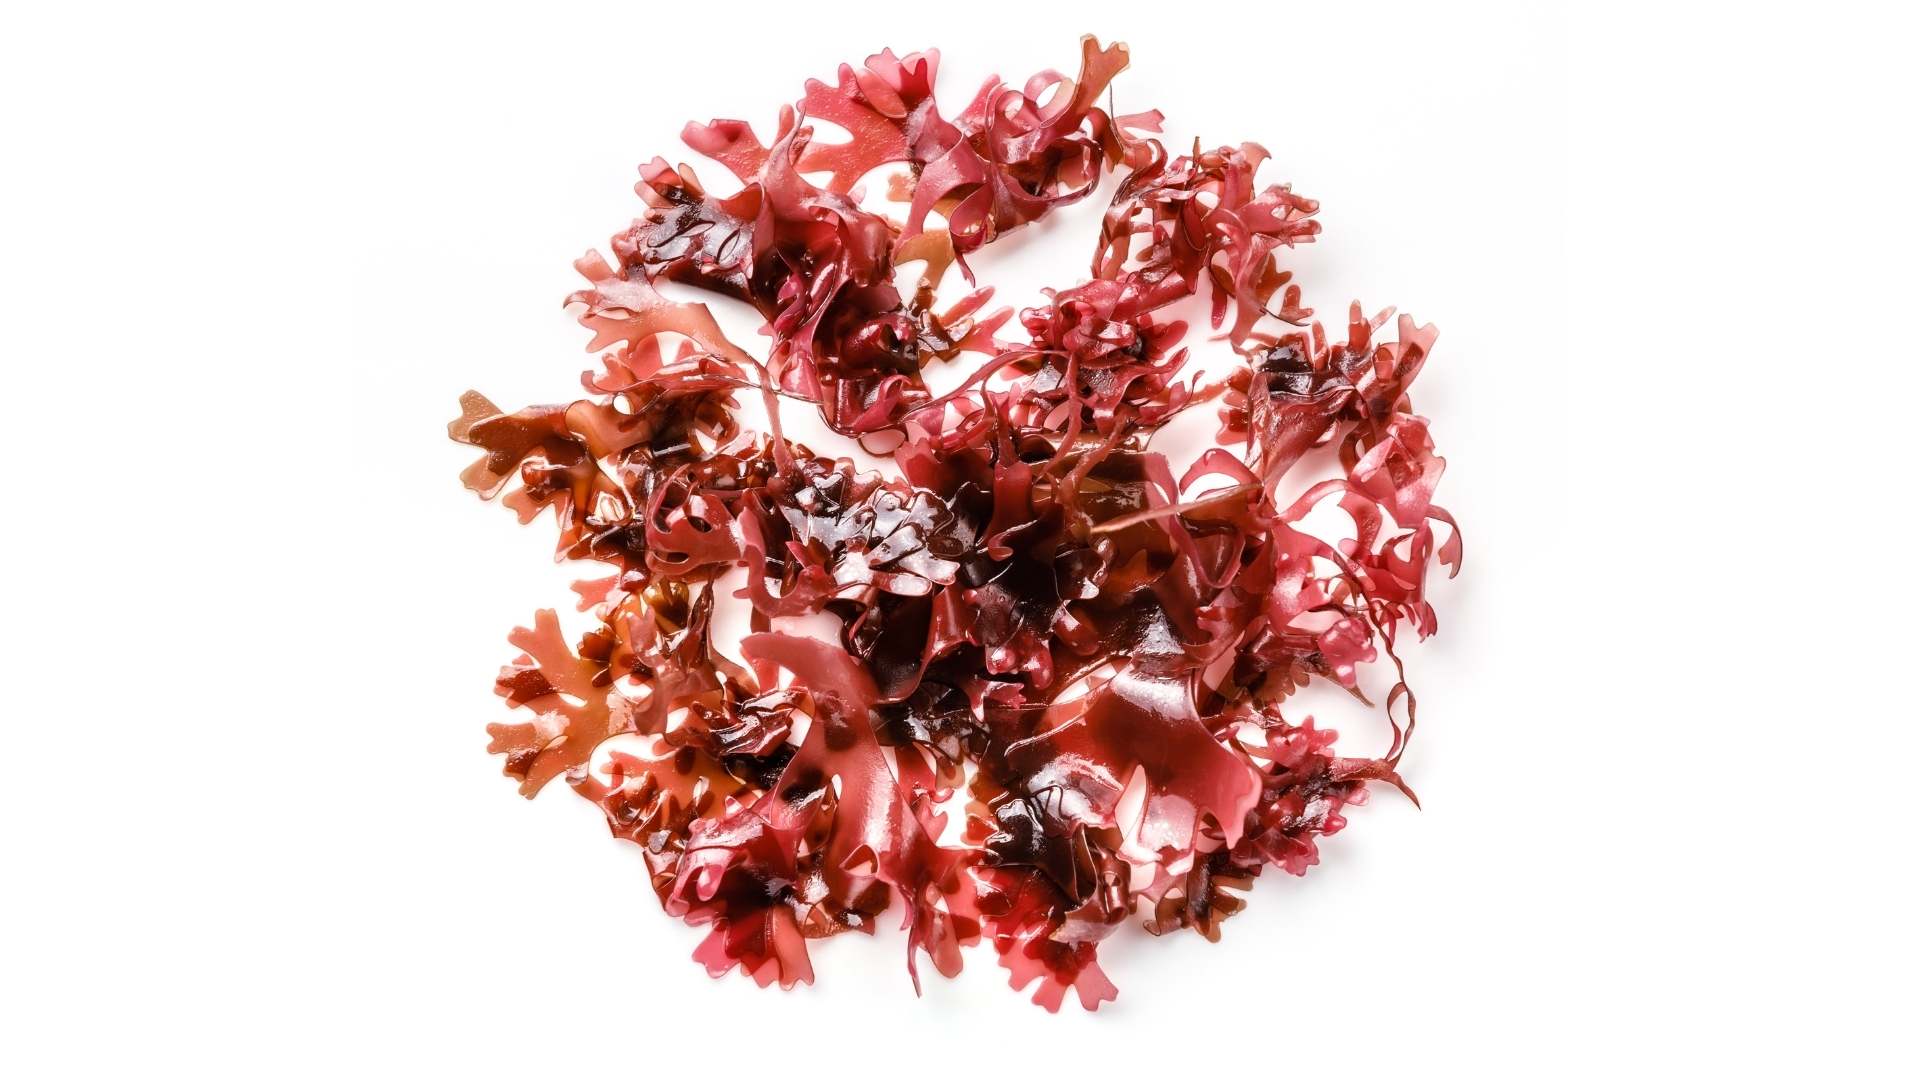 A photo of red seaweed on a white background